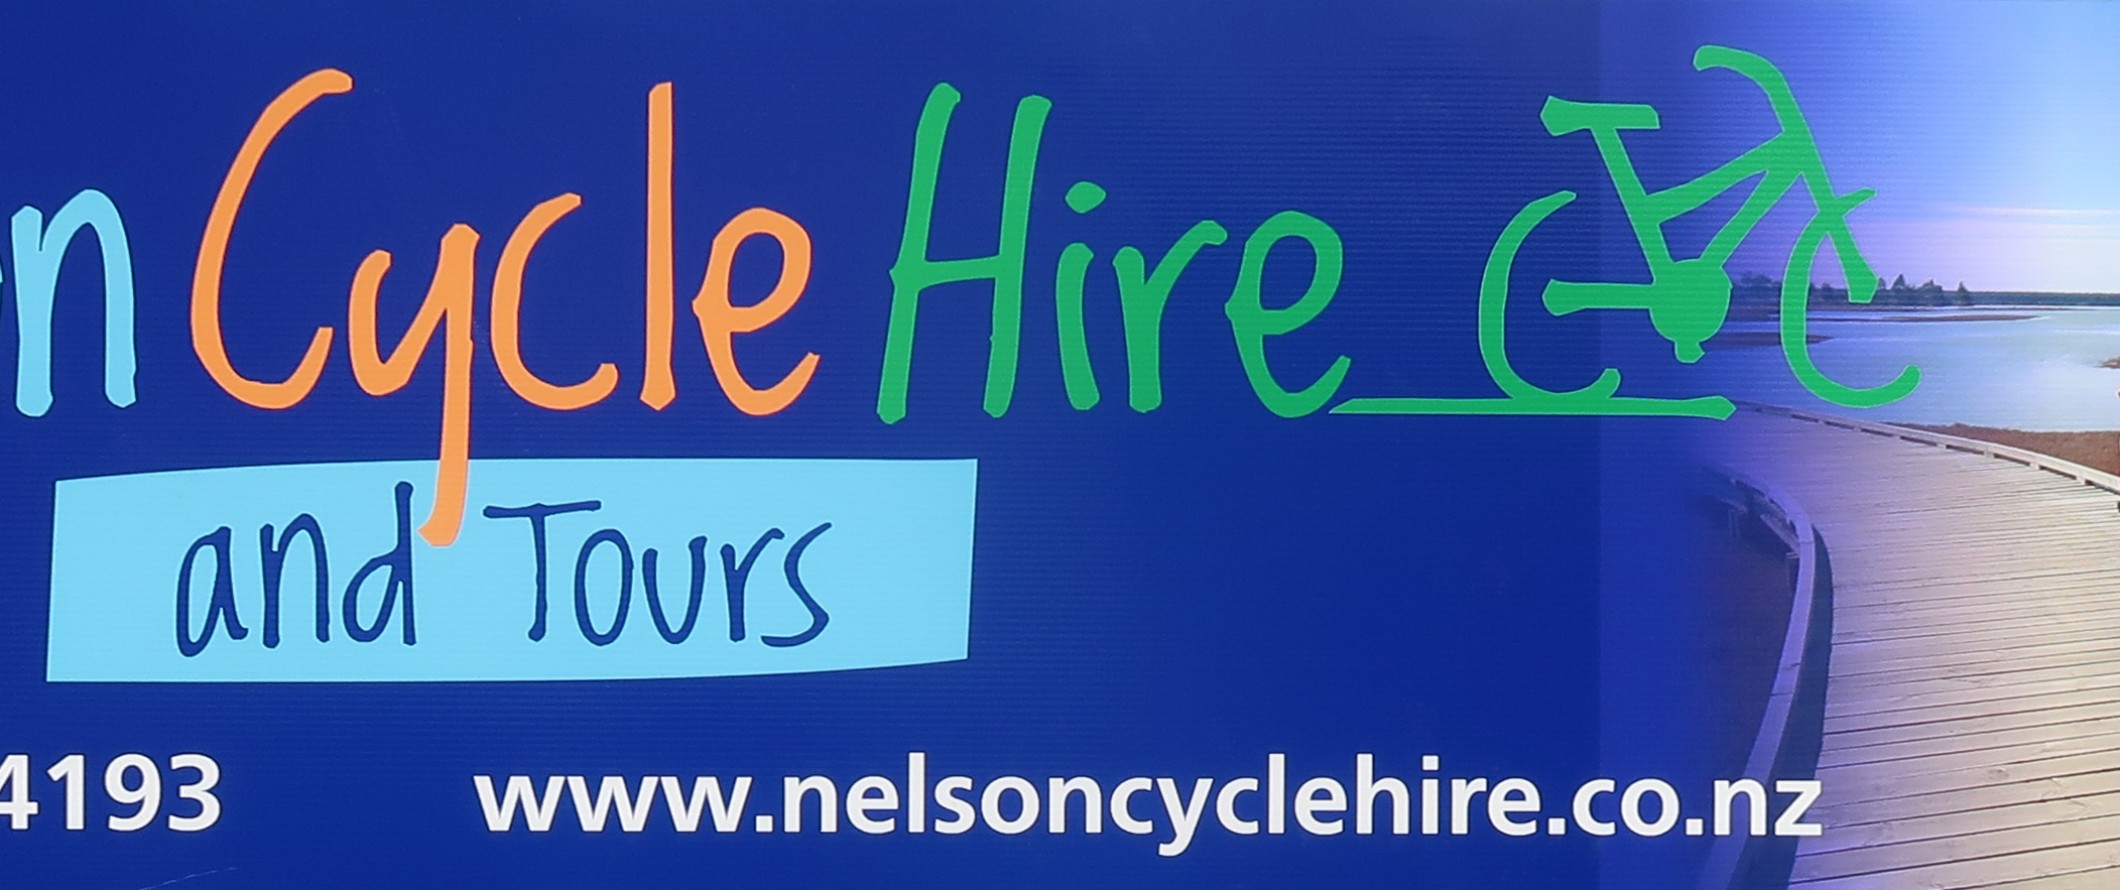 Nelson Cycle Hire Banner